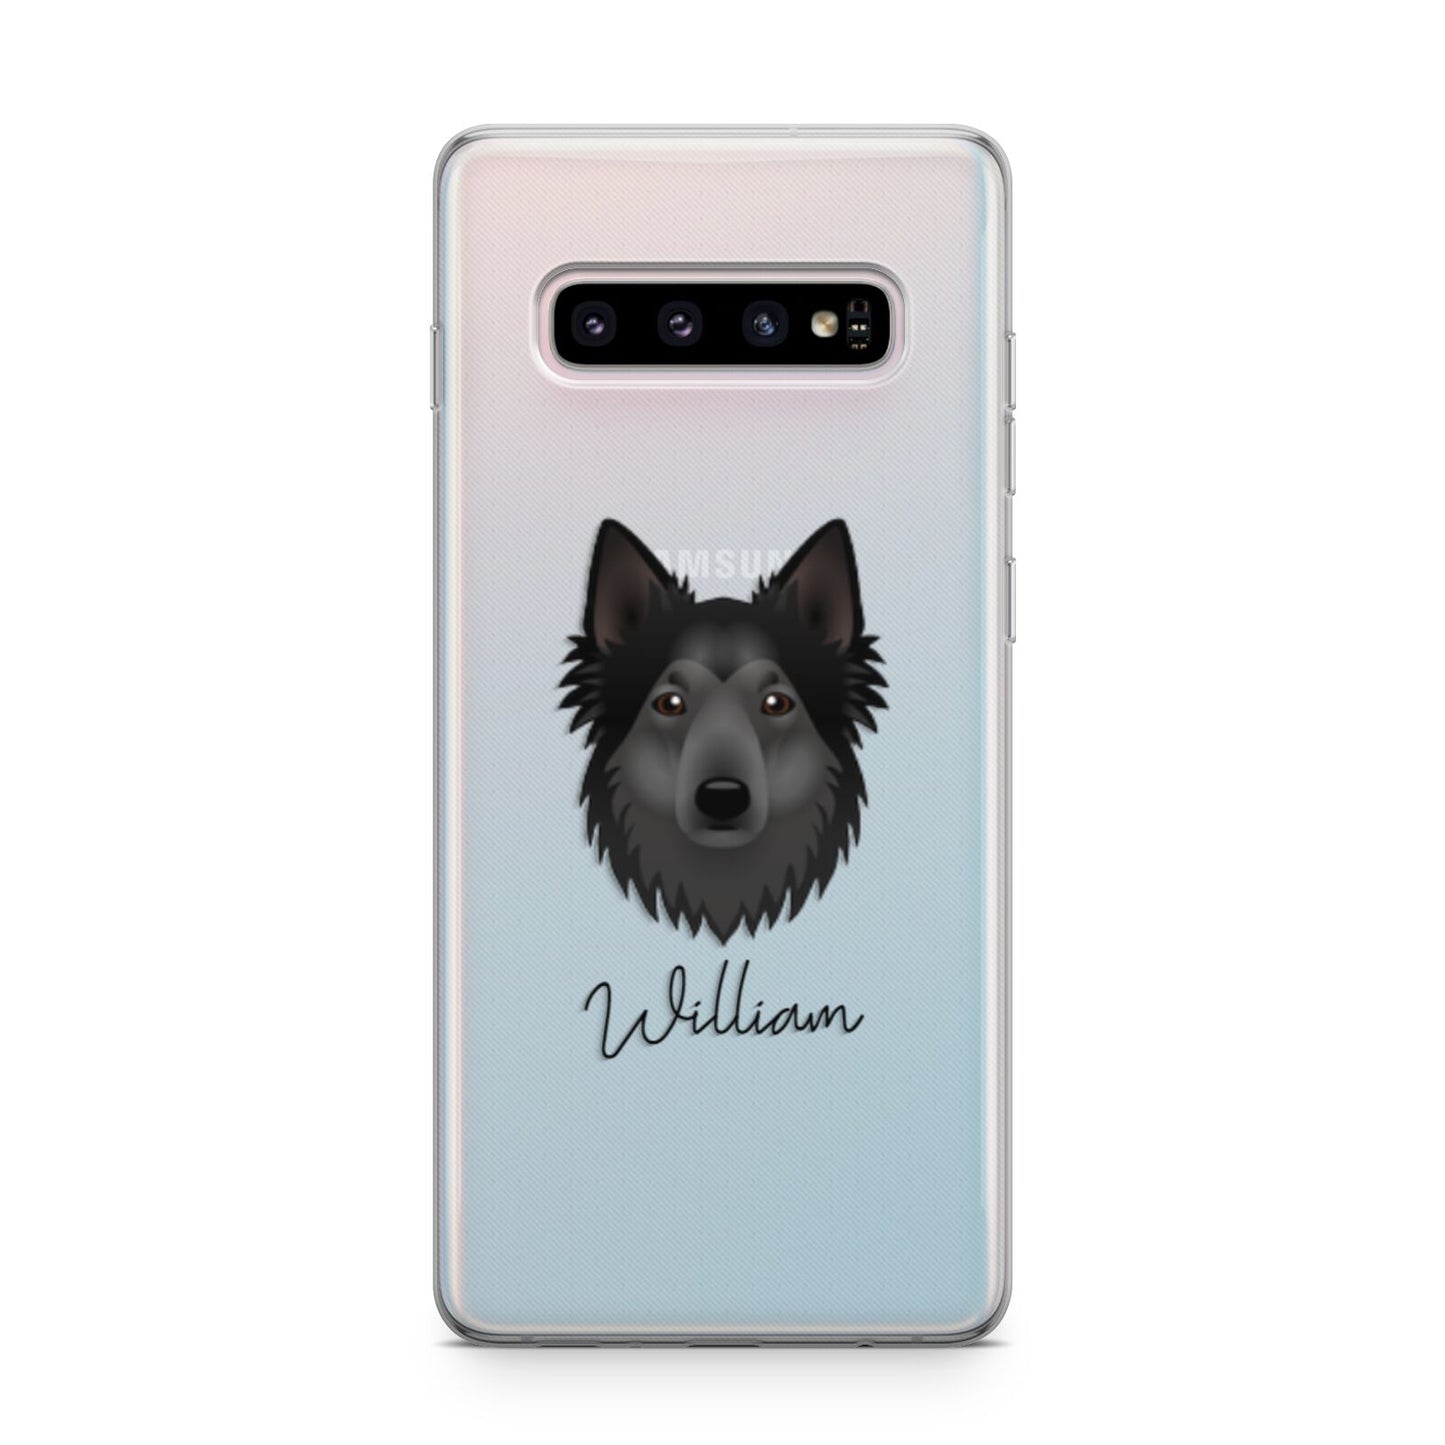 Shollie Personalised Samsung Galaxy S10 Plus Case